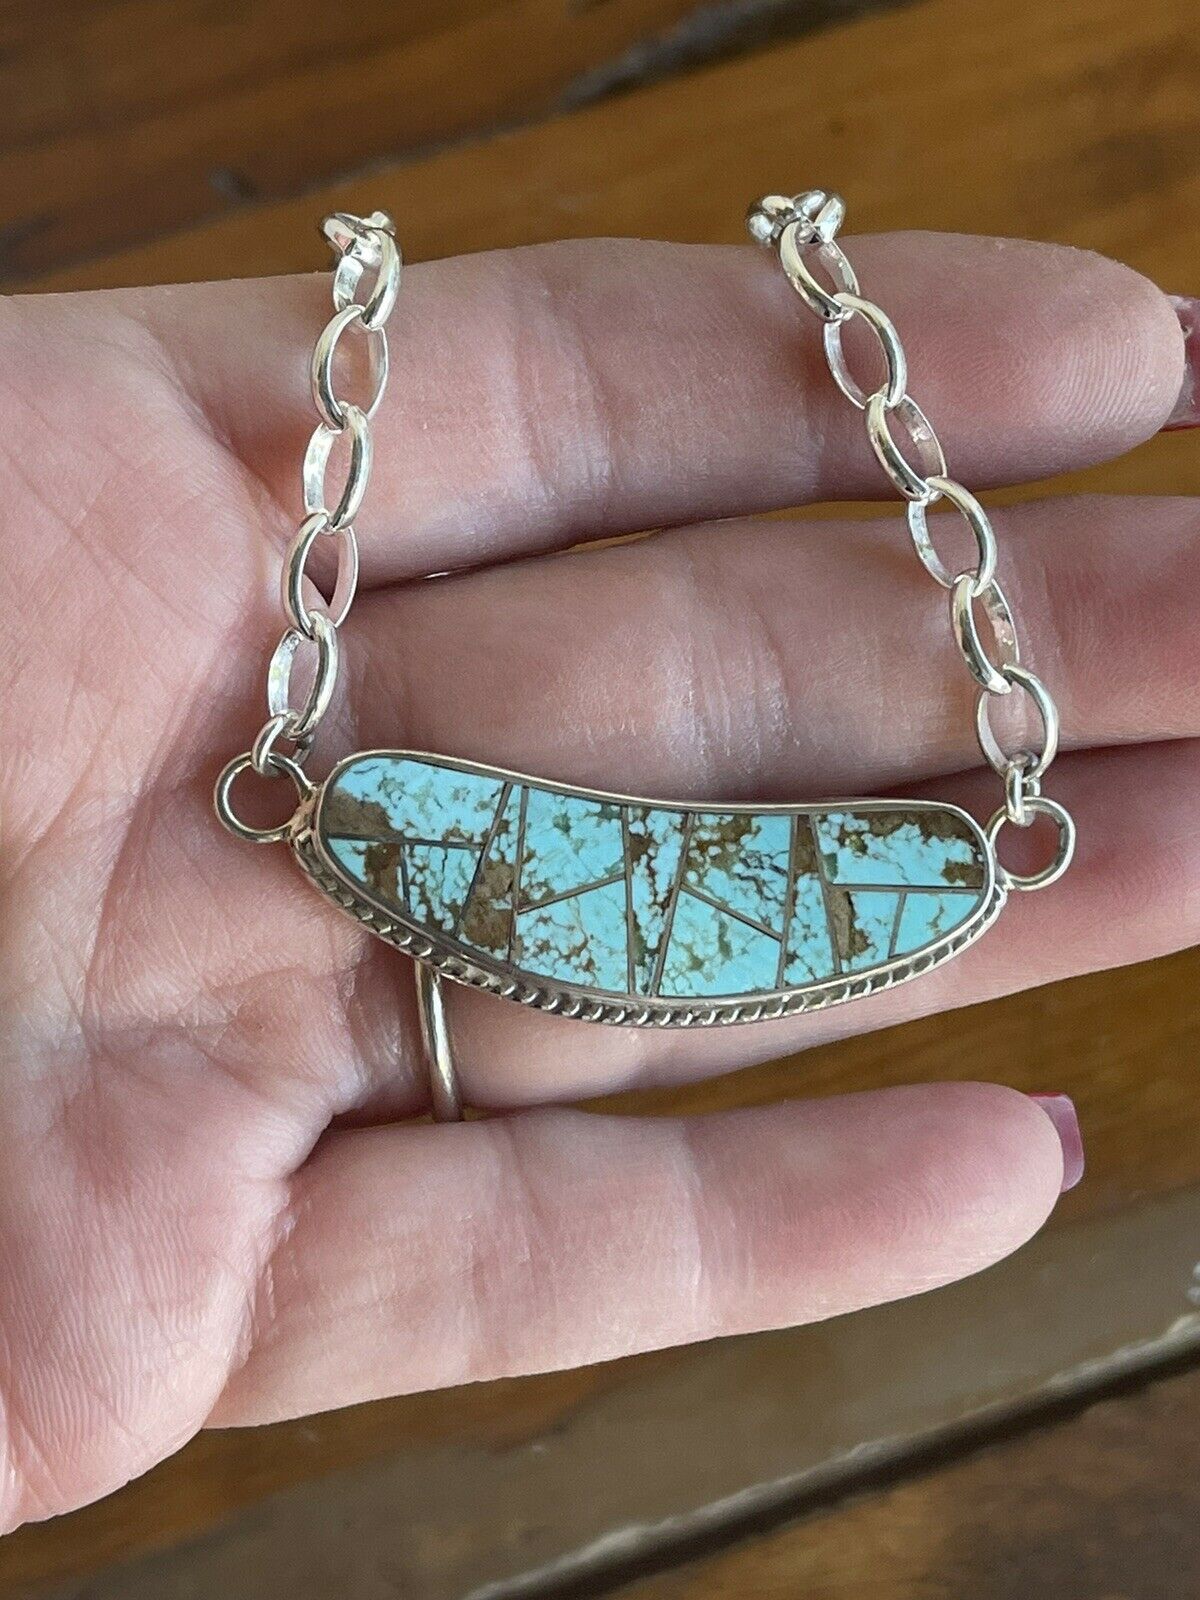 Navajo Sterling Silver & Turquoise Inlay Sleek Pendant Necklace